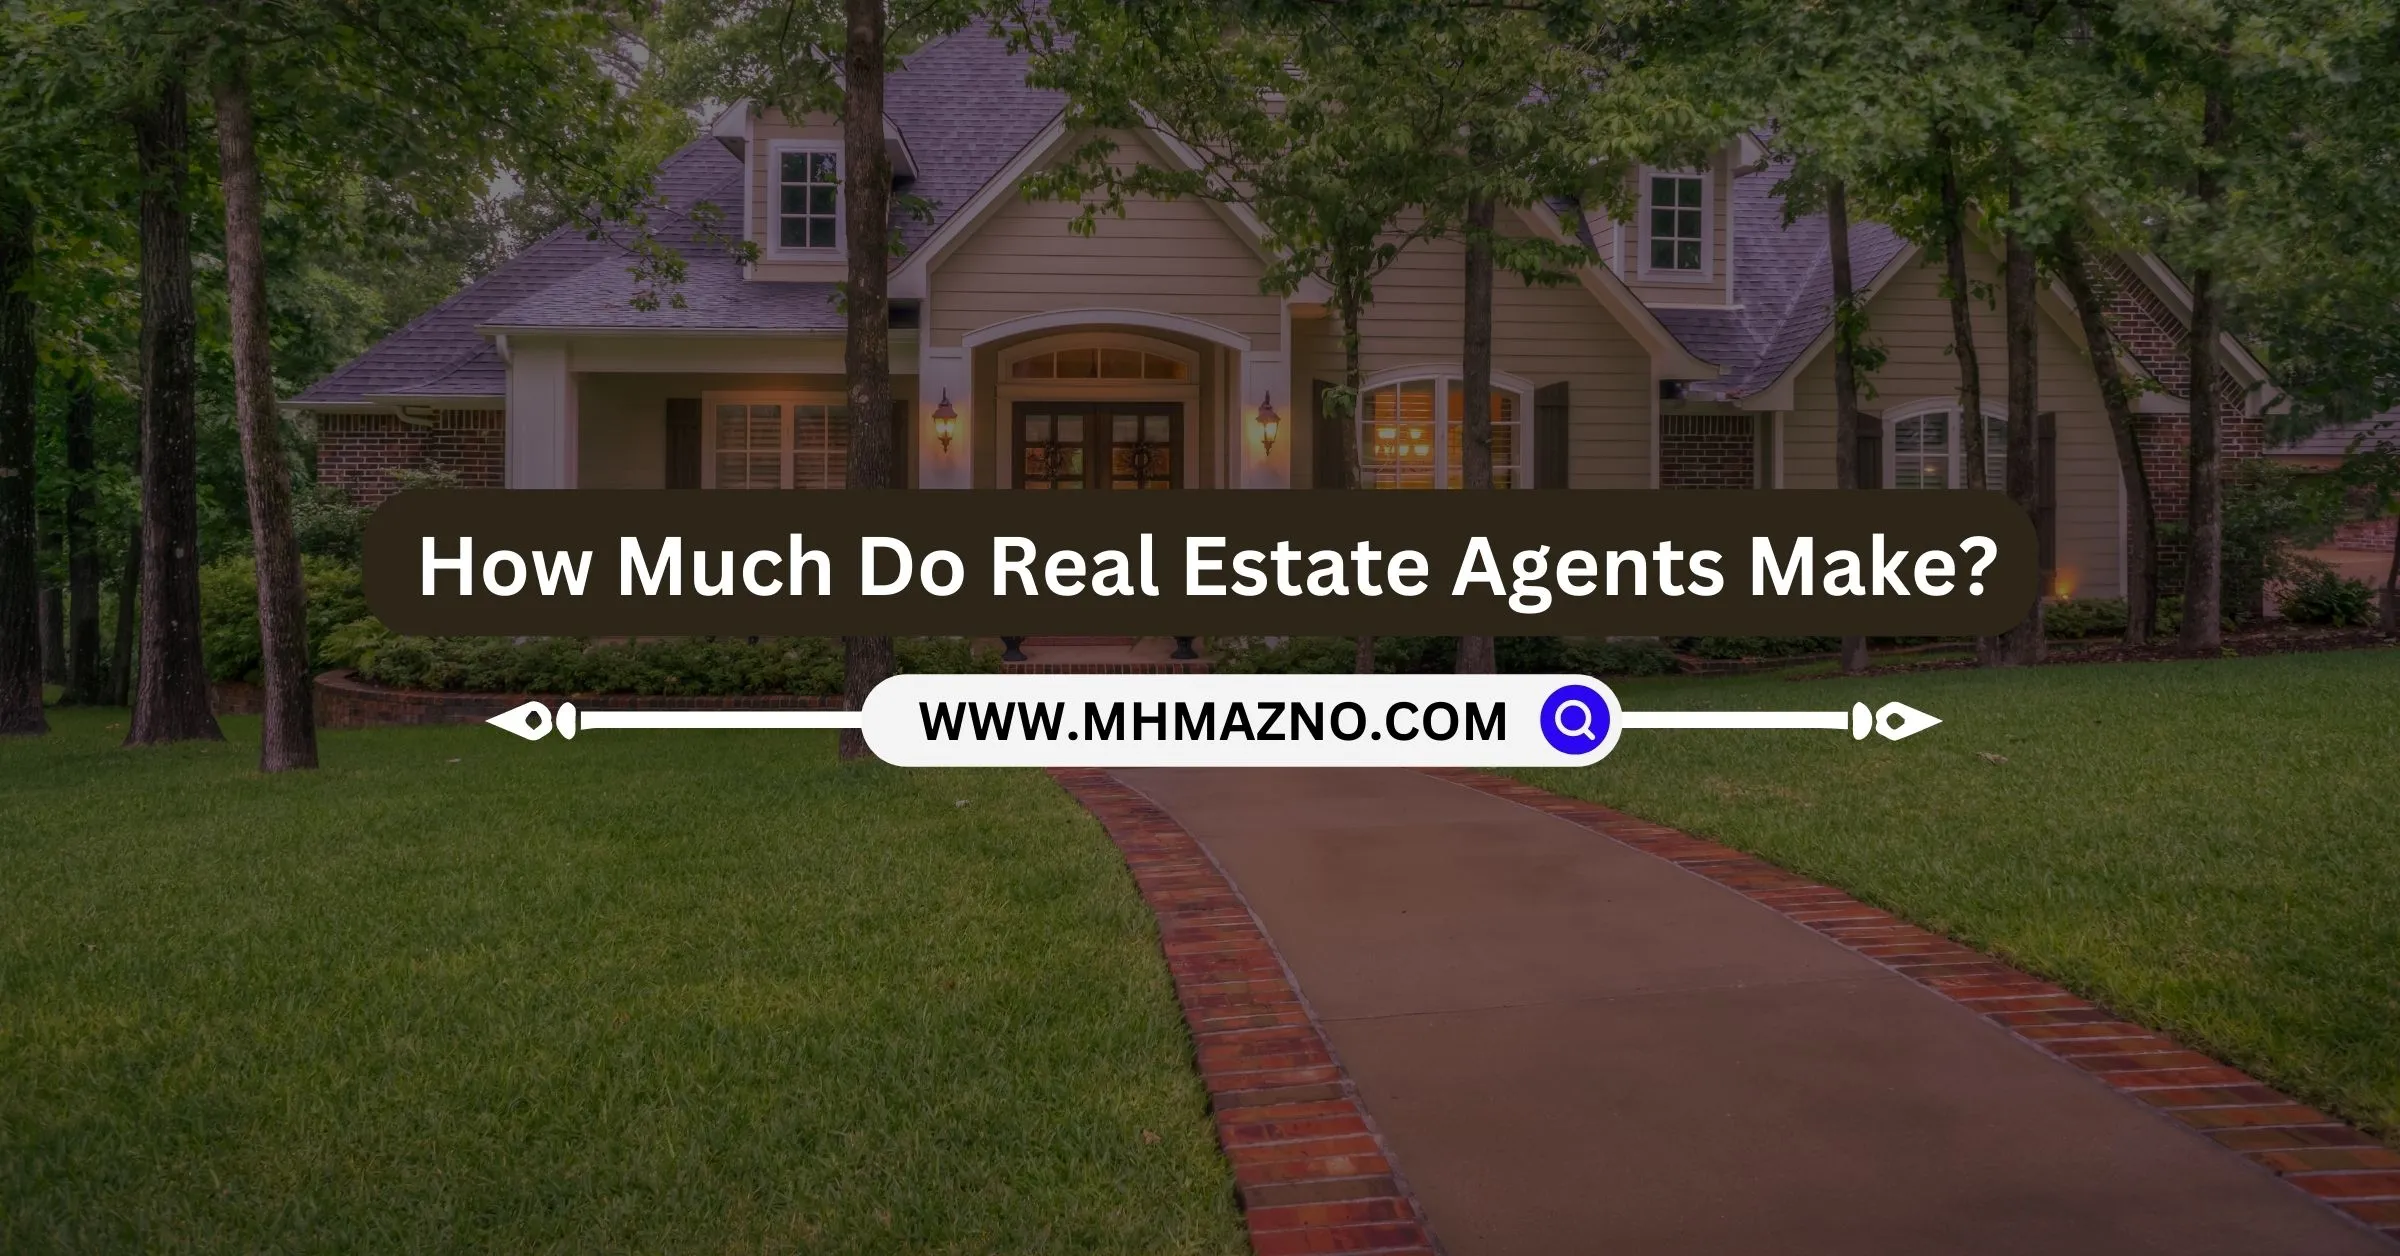 How Much Do Real Estate Agents Make